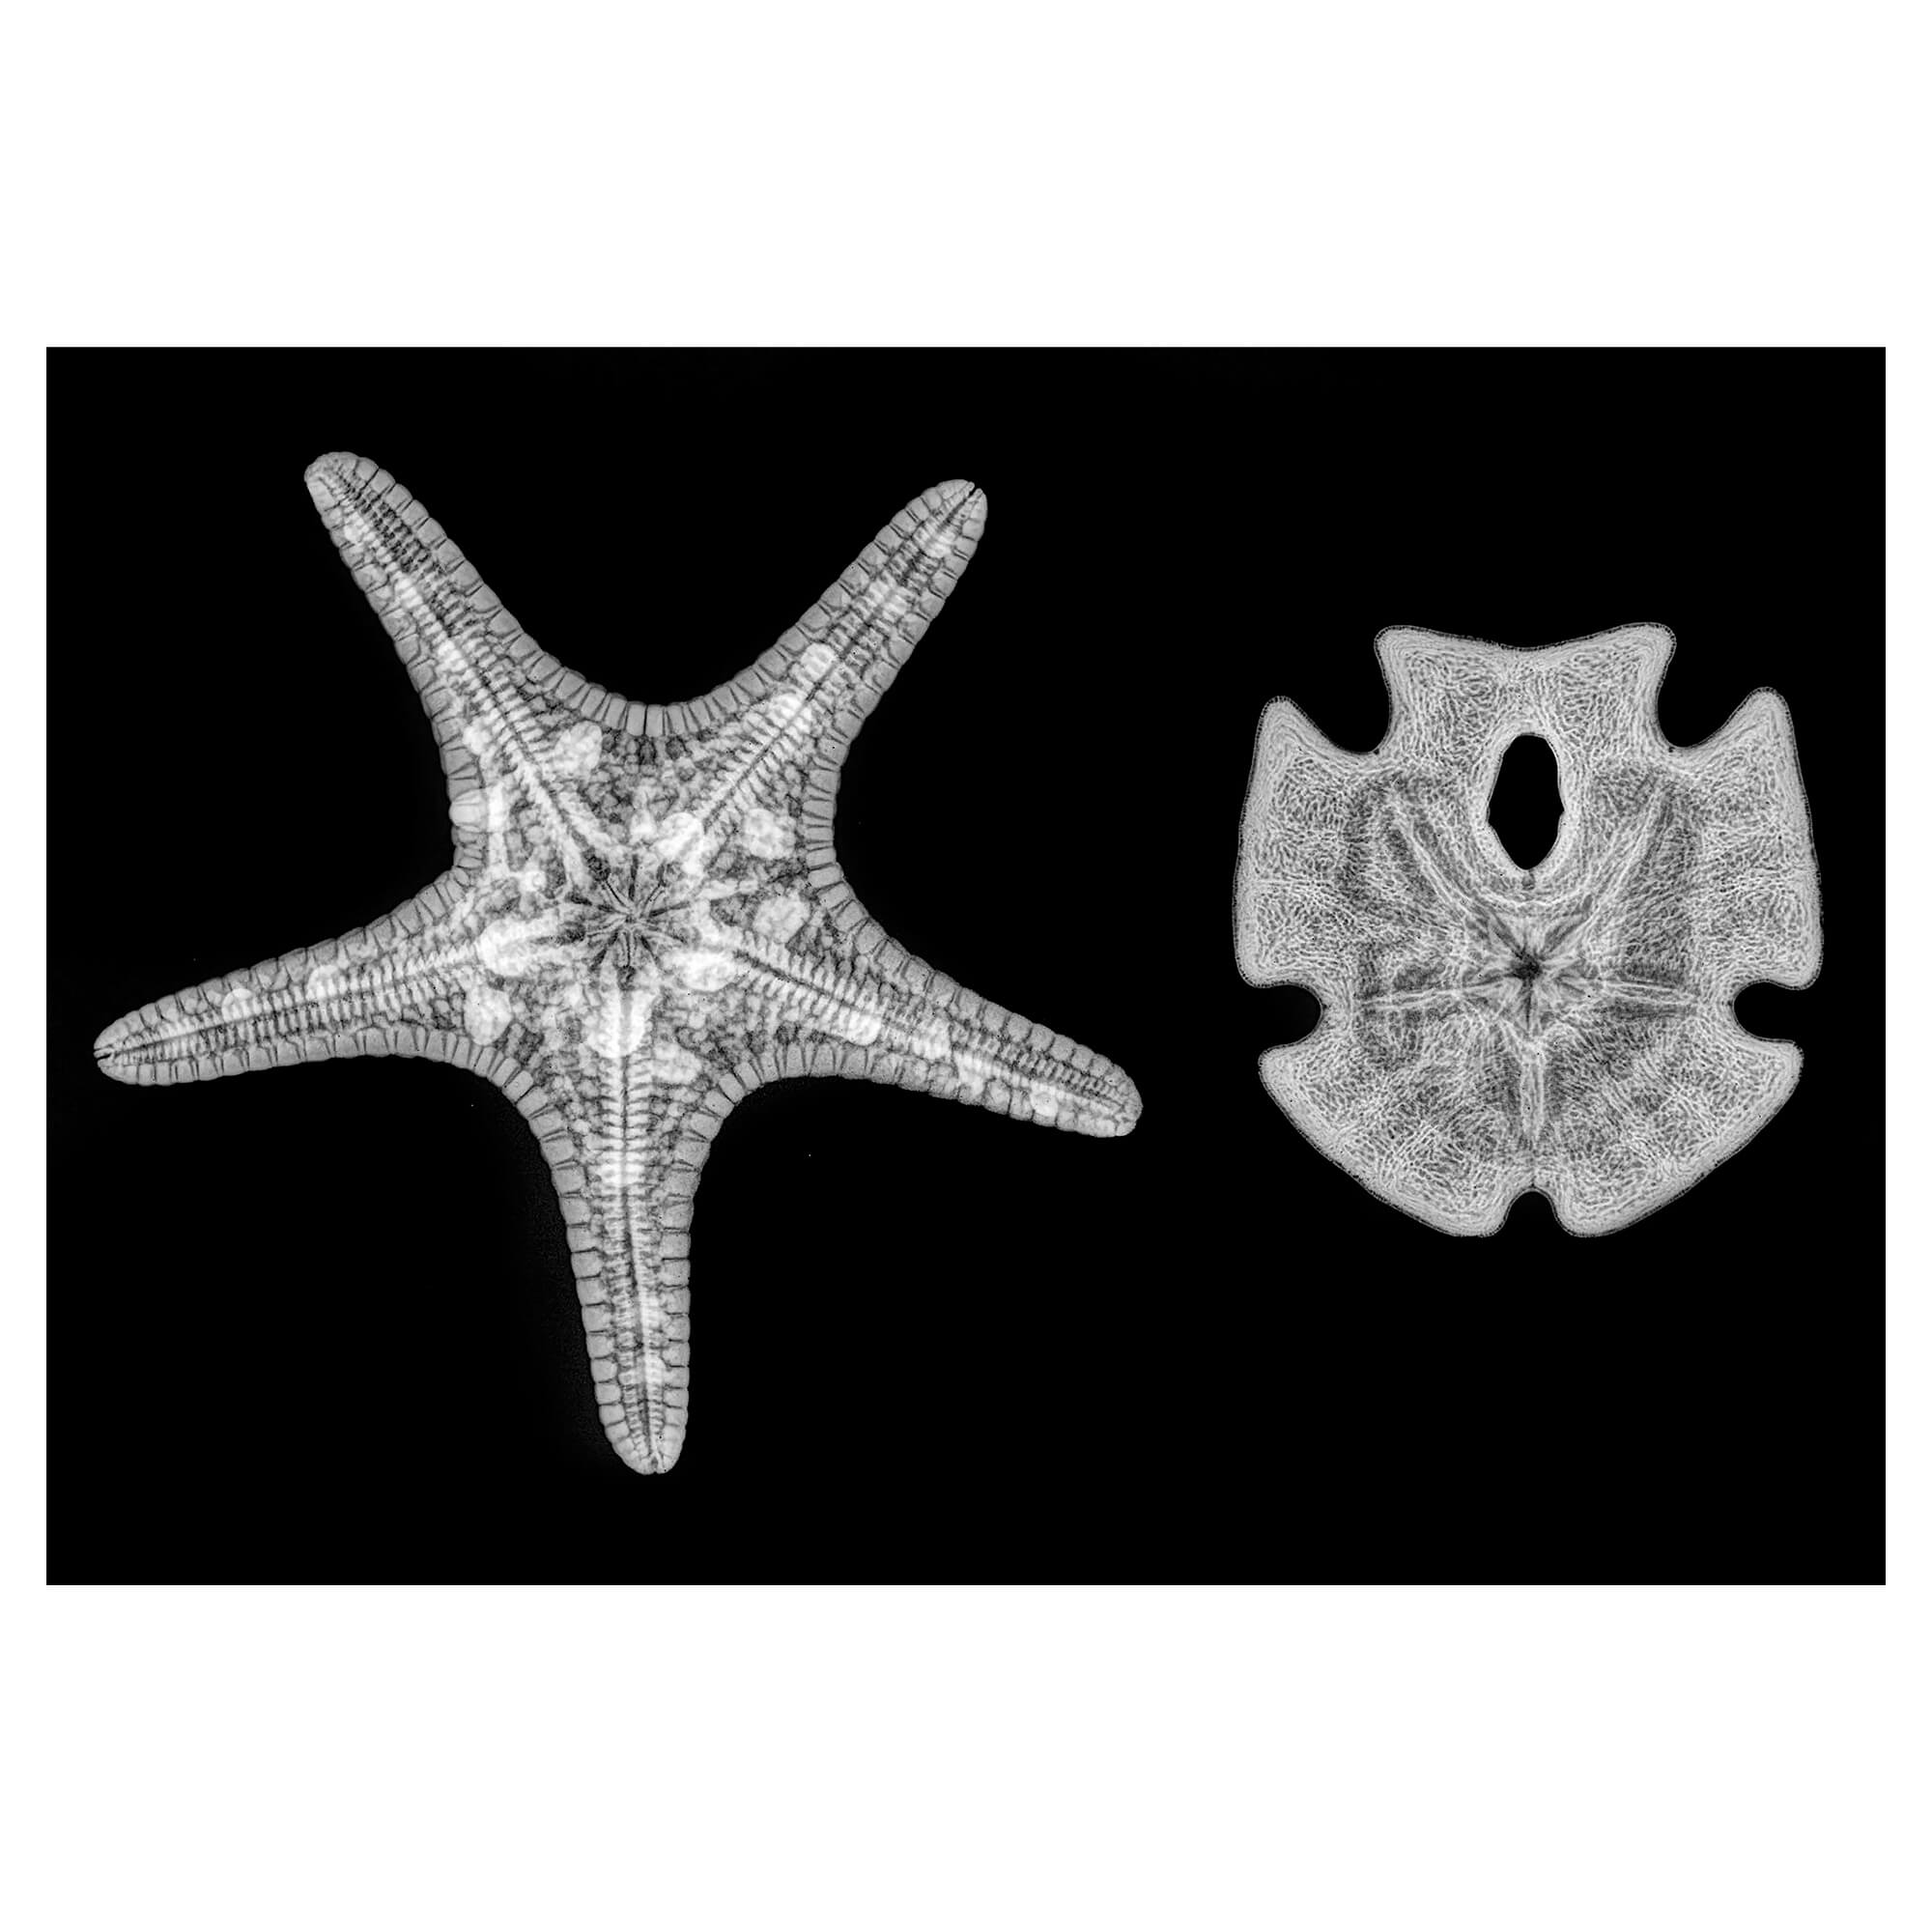 X-ray artwork depicting starfish and sand dollars by Hawaii artist Michelle Smith